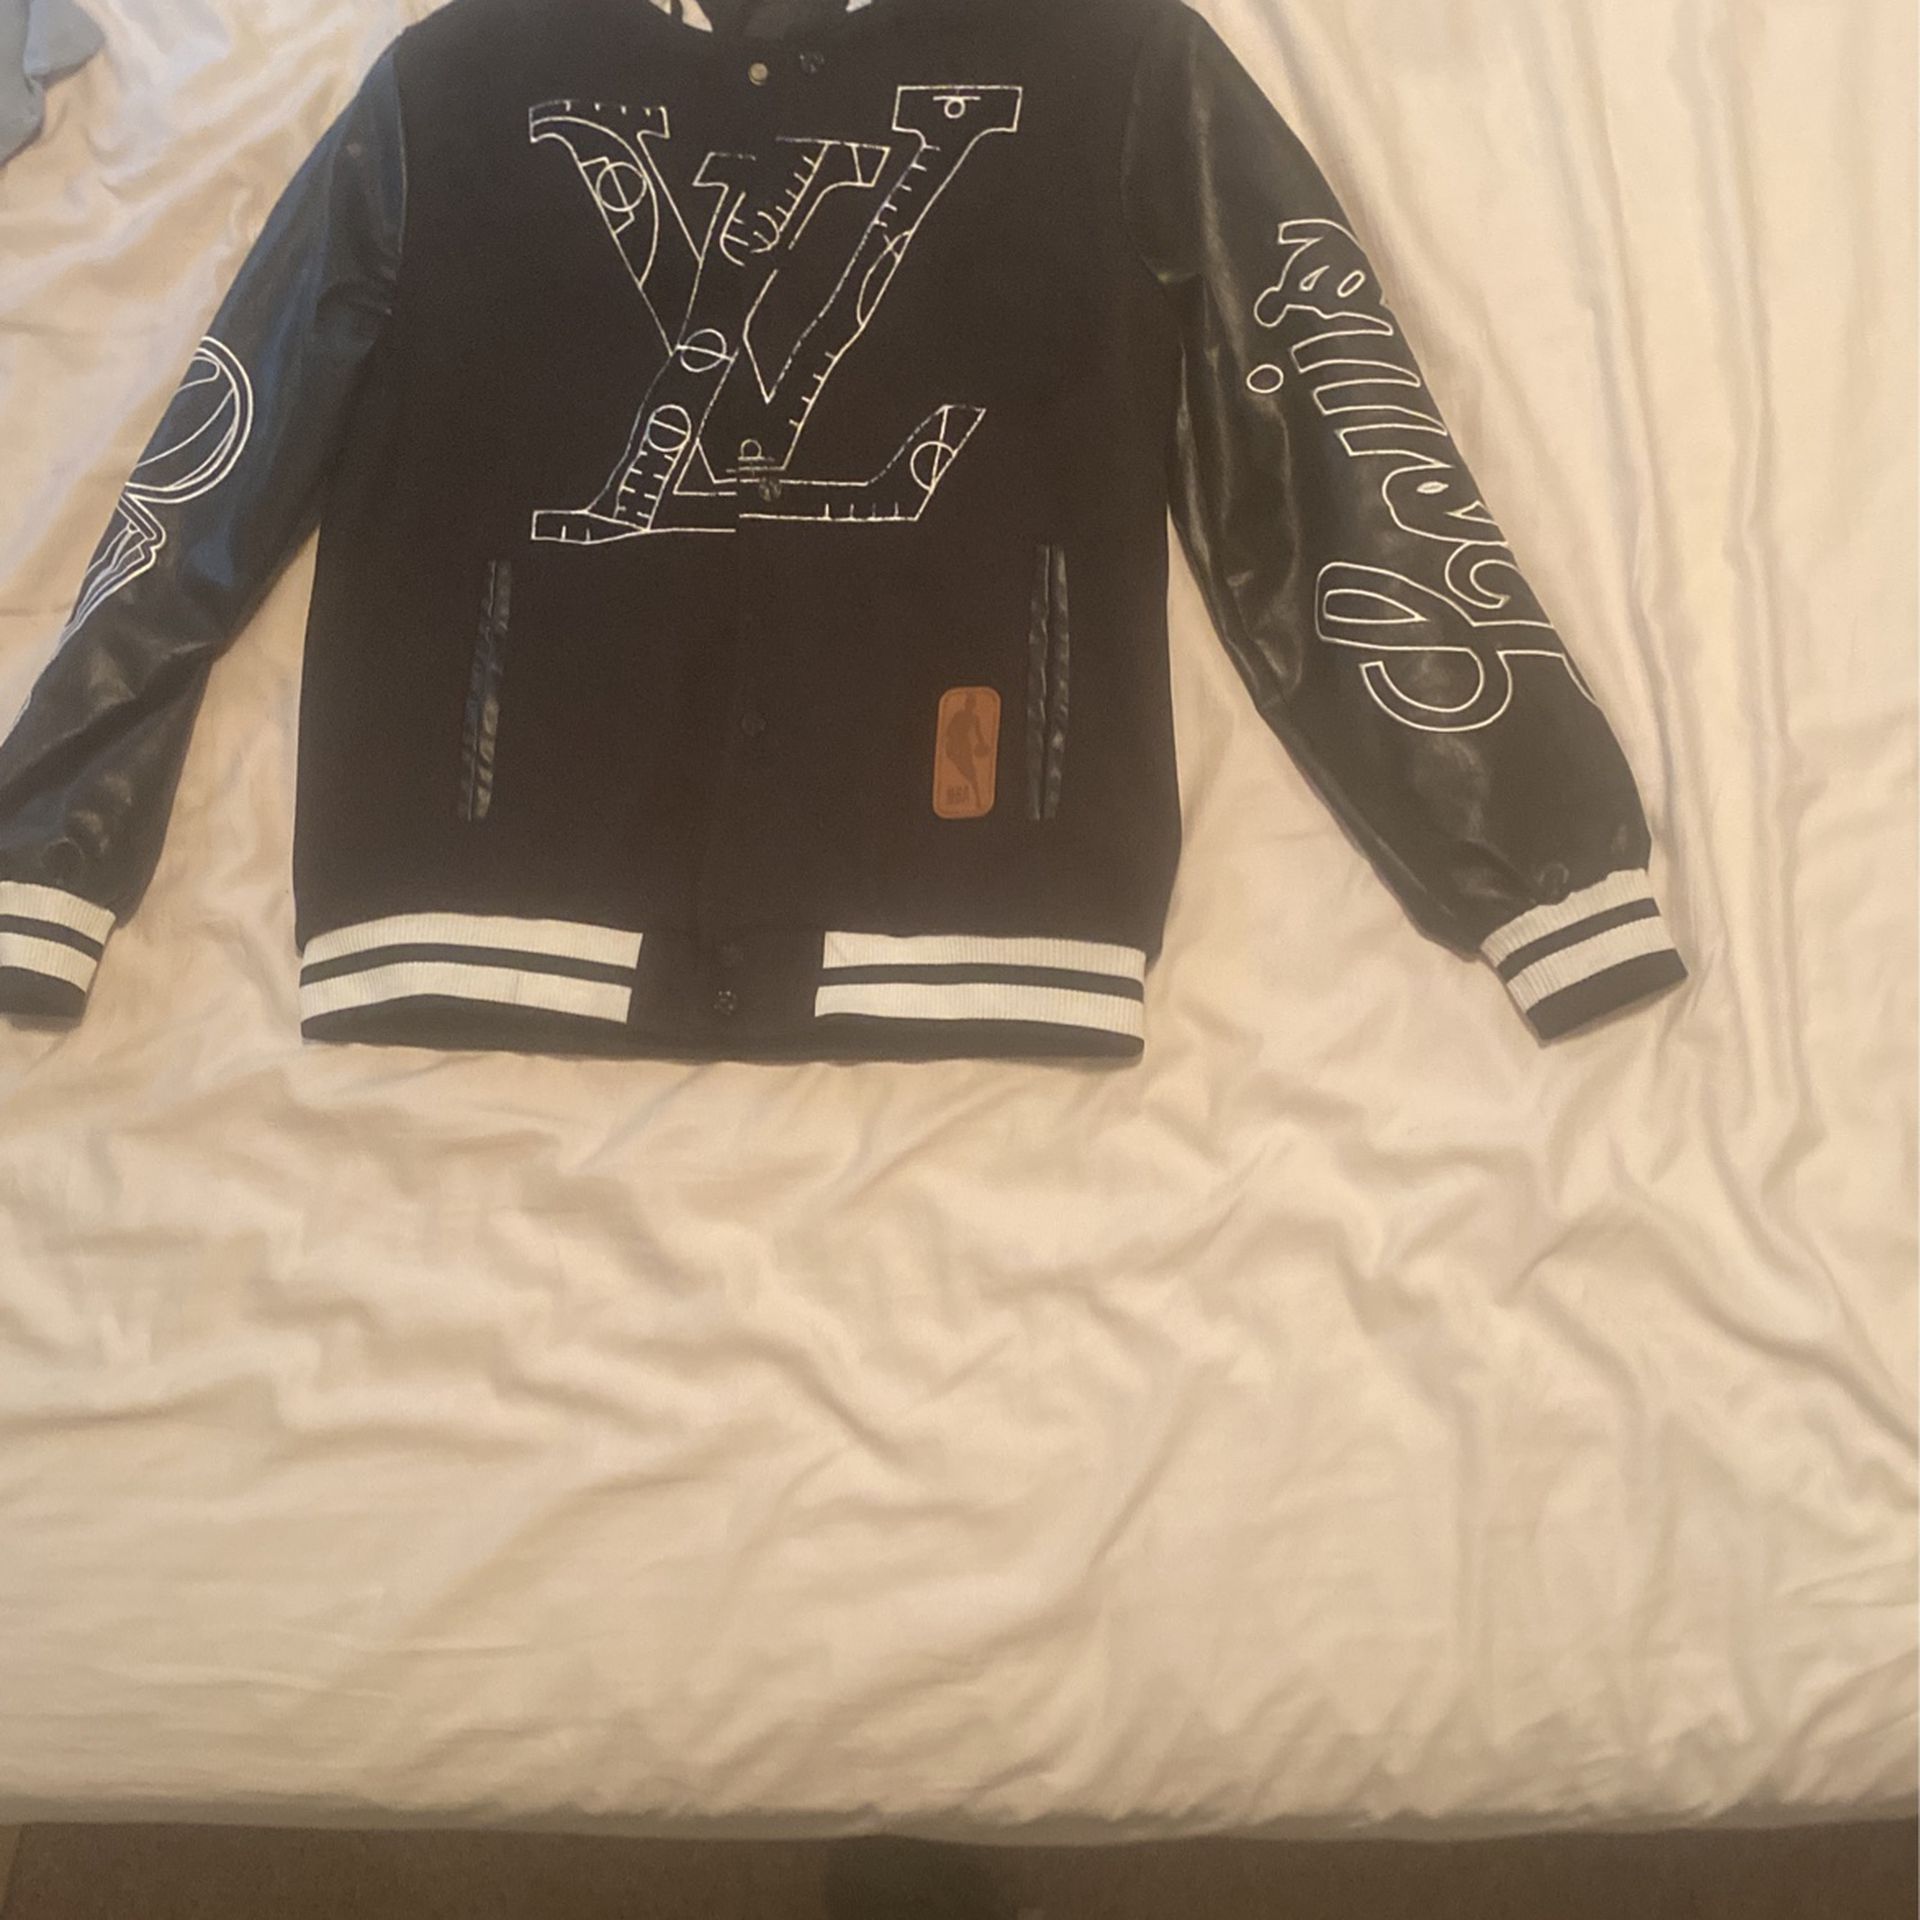 Louis Vuitton Jacket Size Large for Sale in Powder Springs, GA - OfferUp